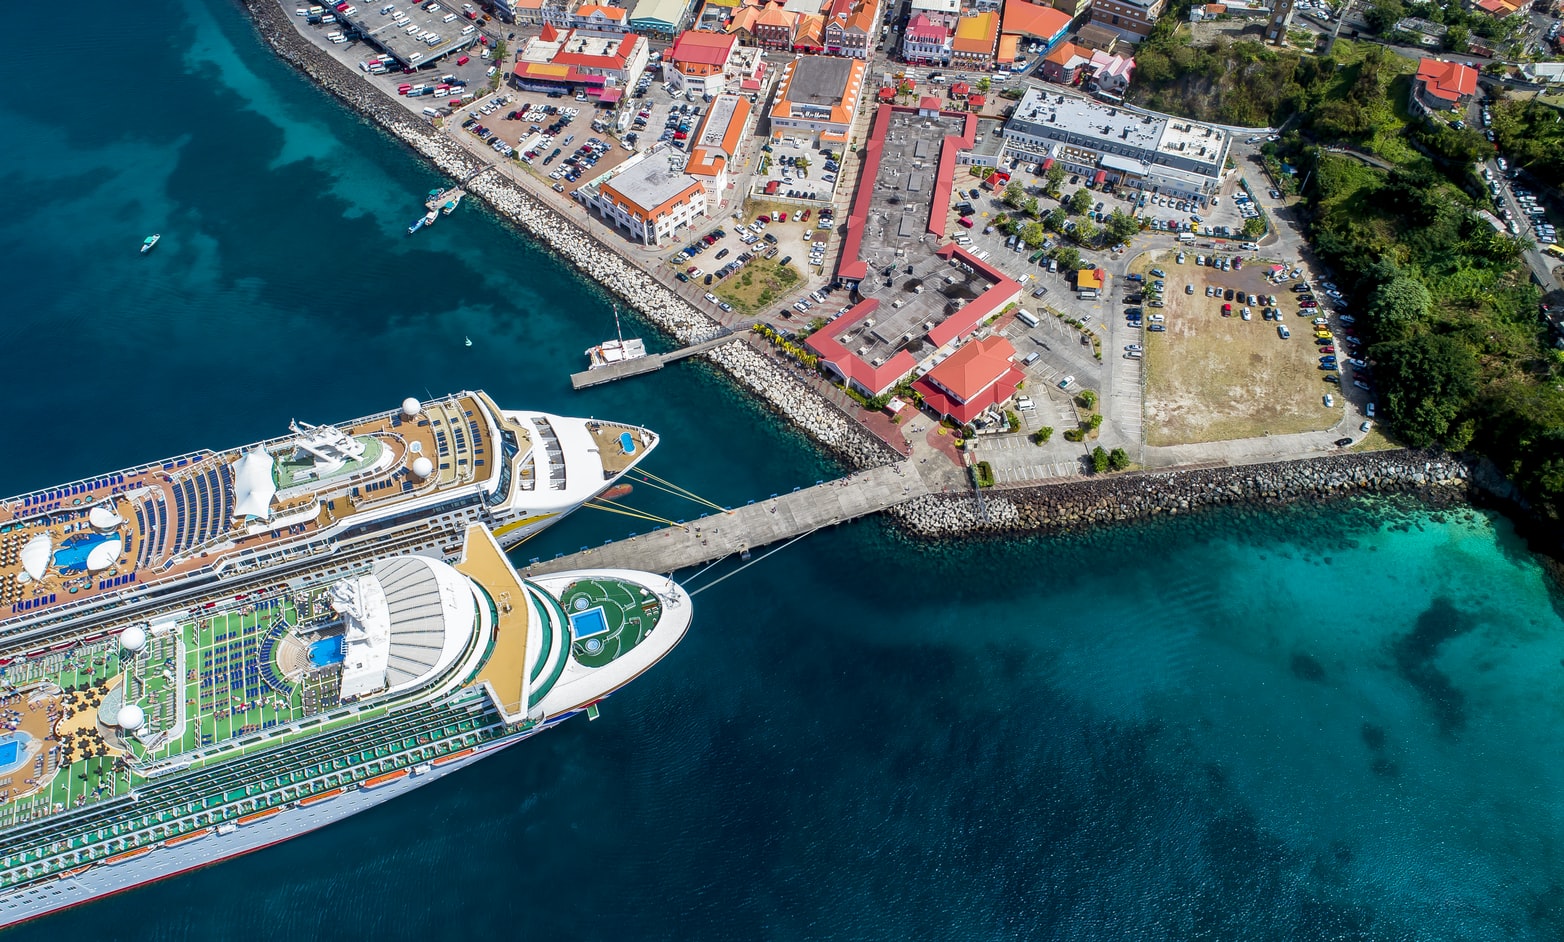 Grenada cruise terminal viewed from above